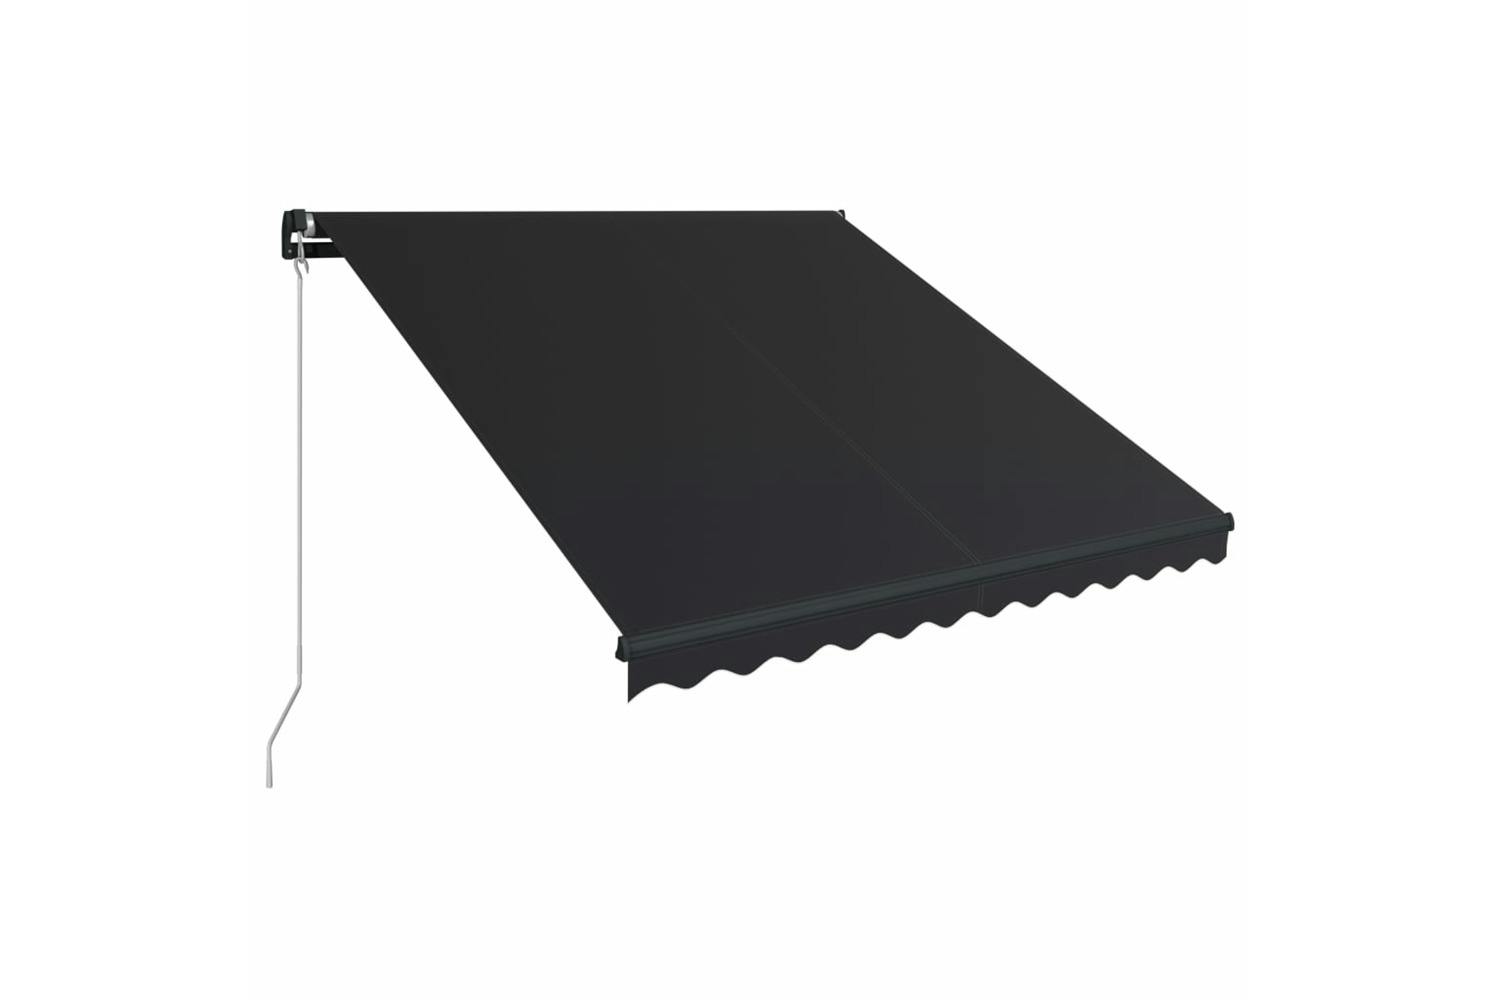 Vidaxl 3051237 Manual Retractable Awning 300x250 Cm Anthracite